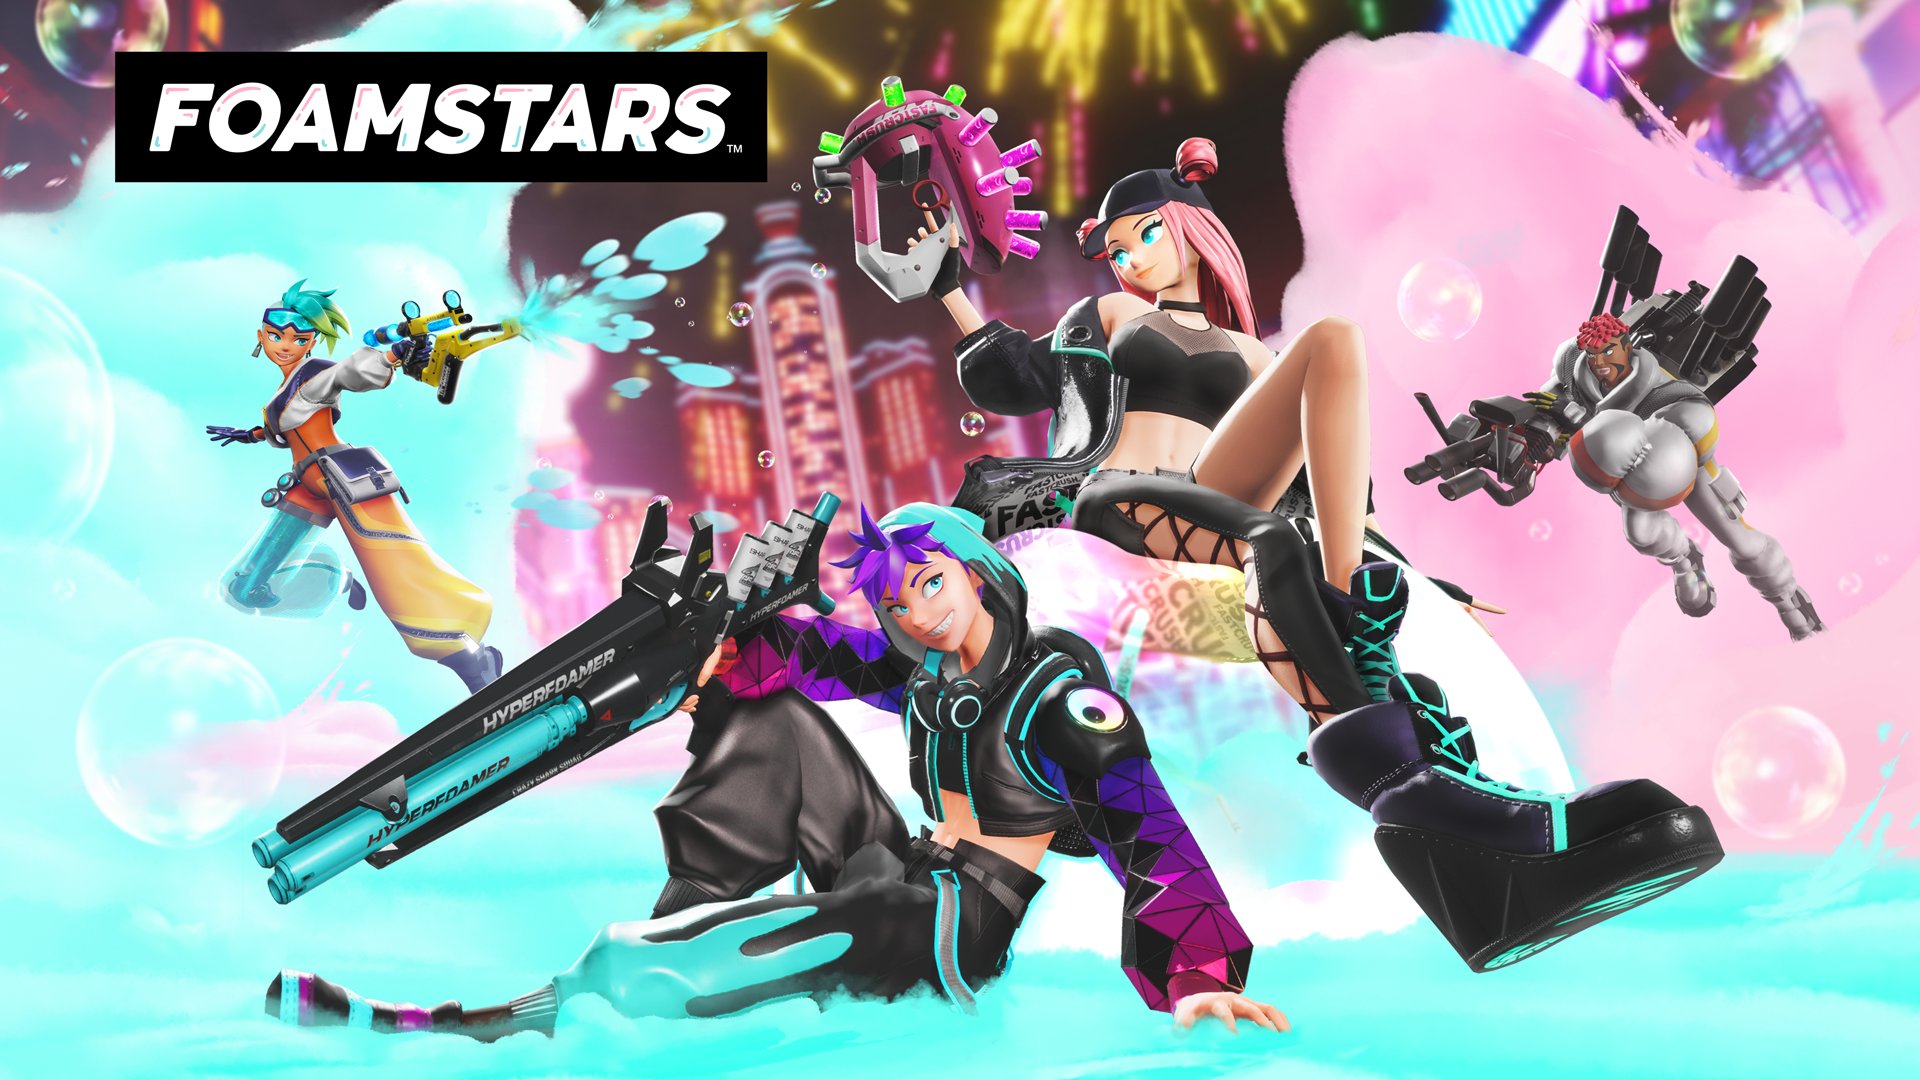  Foamstars release set for February, coming to PlayStation Plus